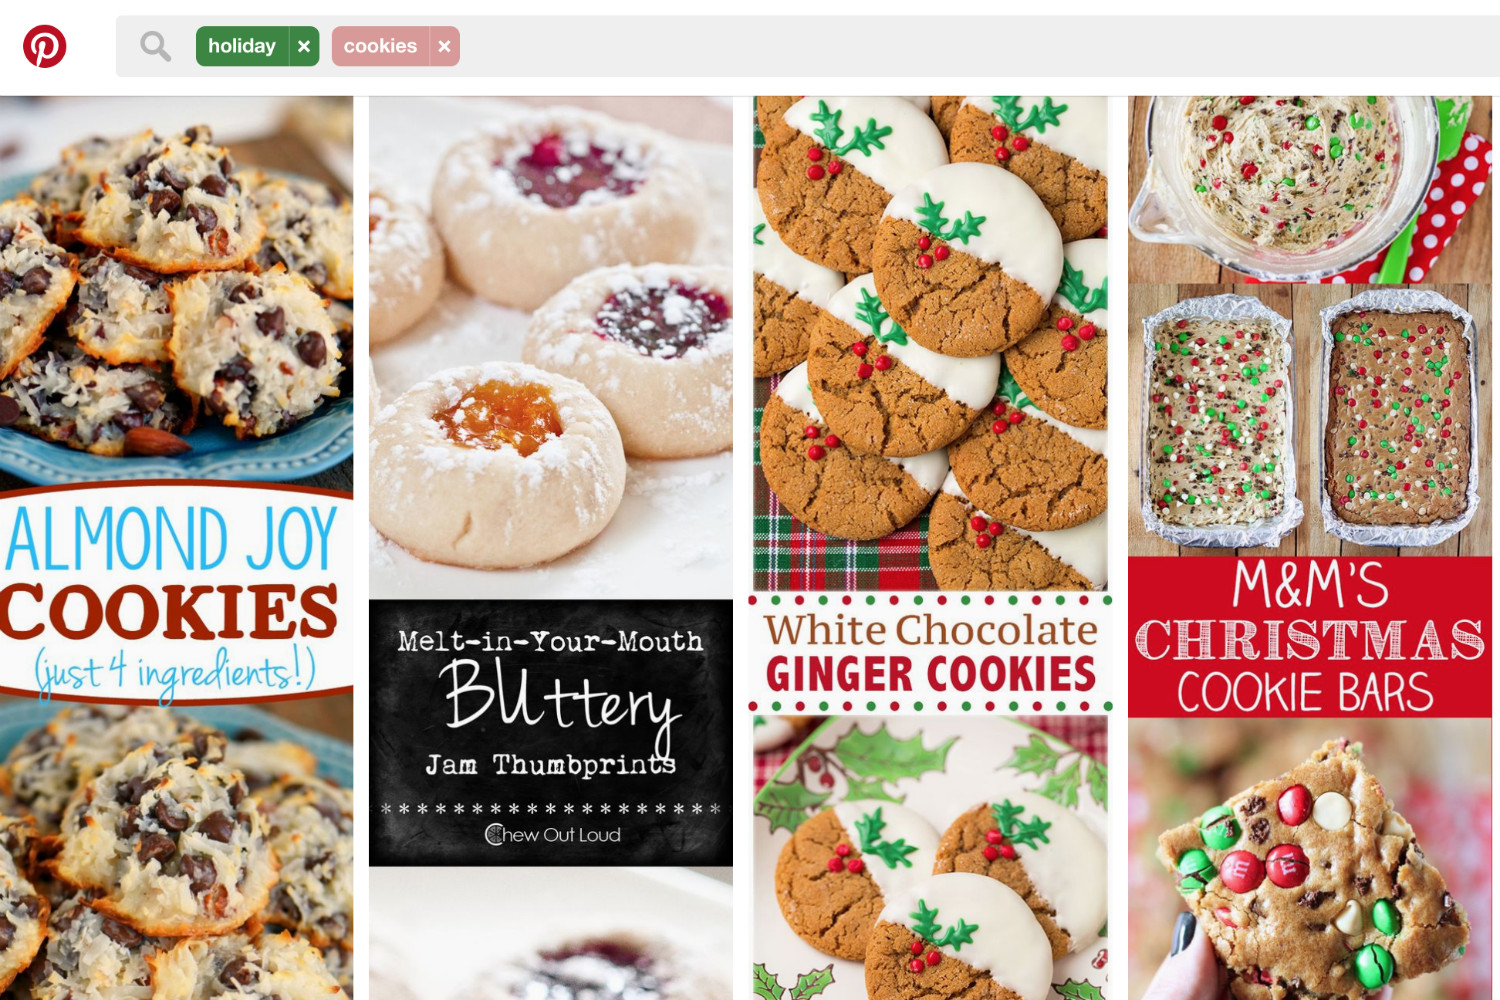 Famous Christmas Cookies
 What is Pinterest’s most popular Christmas cookie recipe